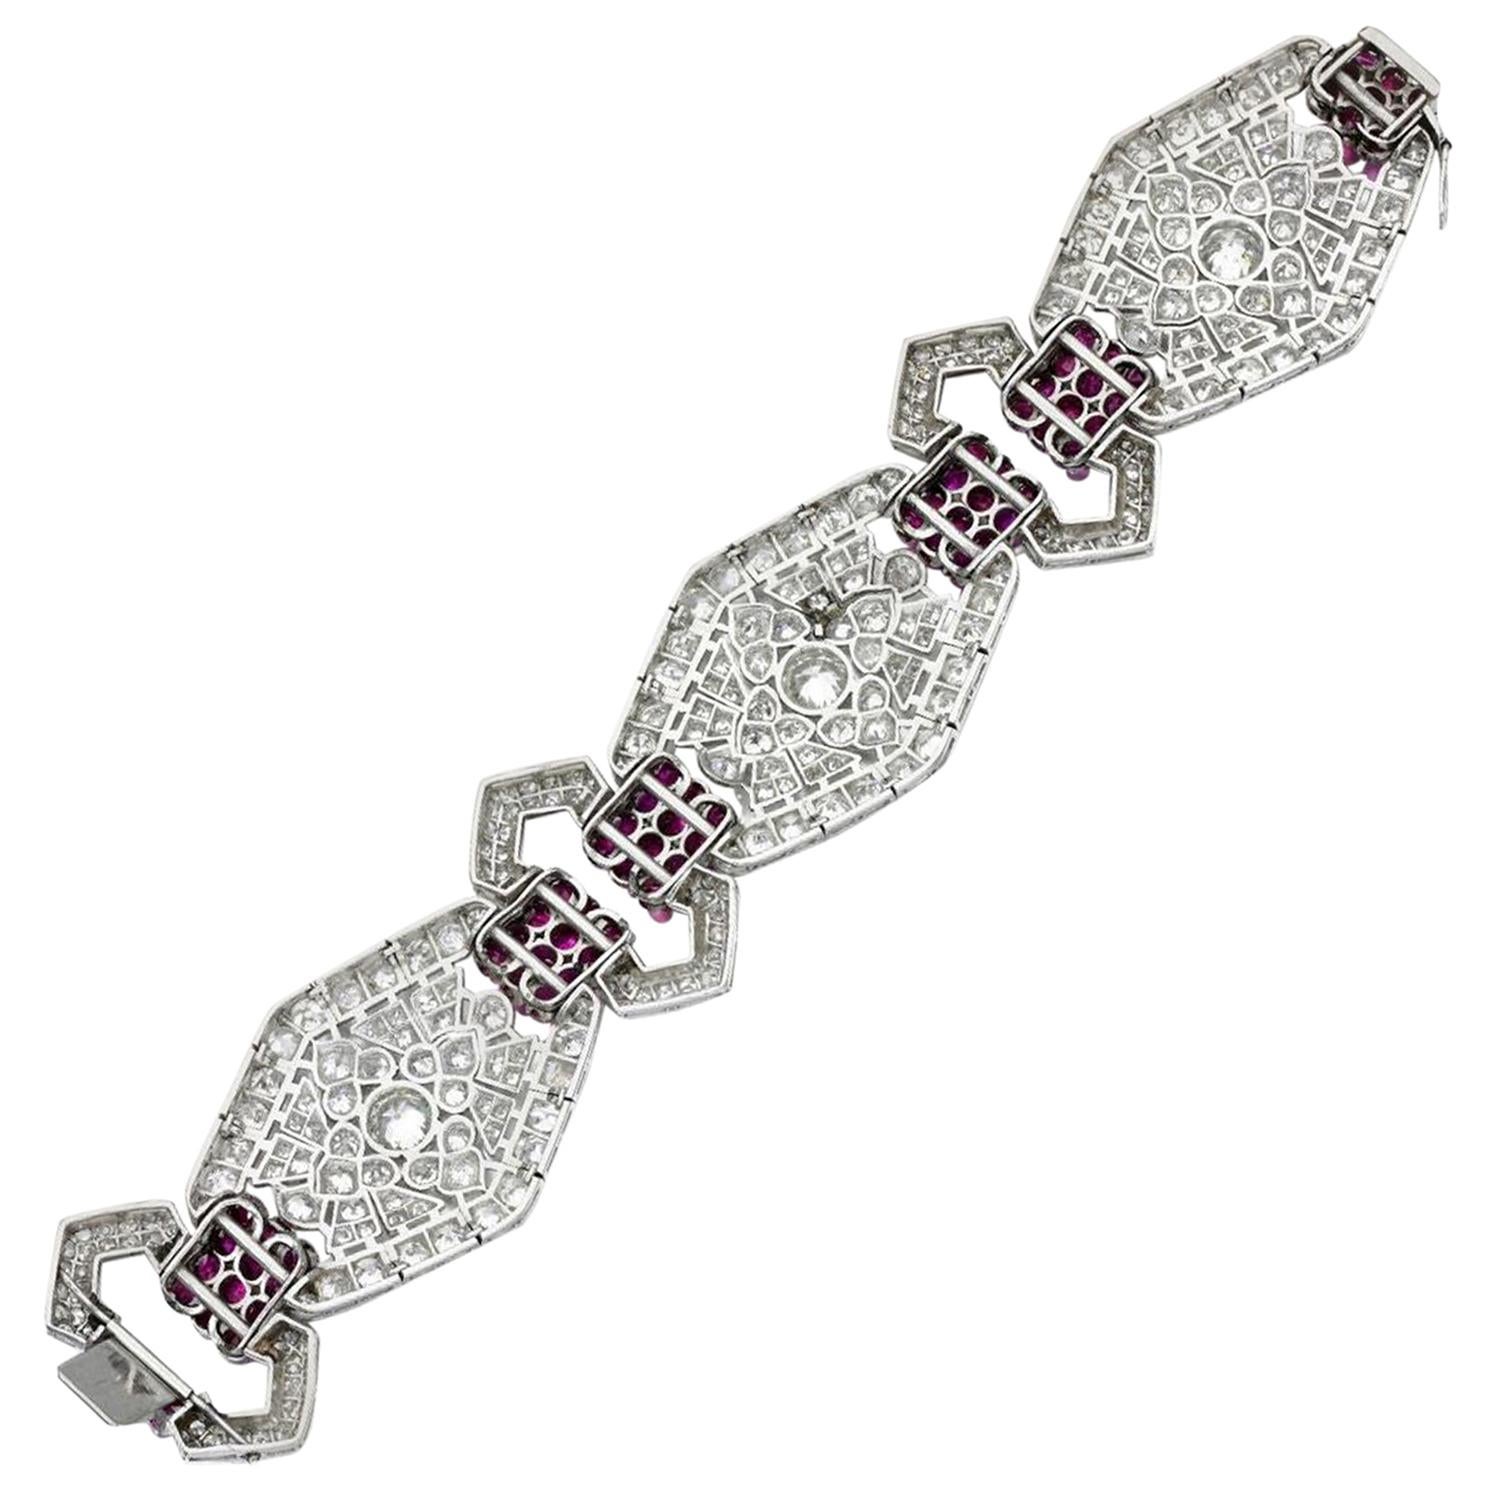 Of geometric design, this stunning Art Deco bracelet is composed of pierced hexagonal plaques spaced with buckle motifs, set with circular-cut rubies and single- and circular-cut diamonds, length approximately 175mm, French assay marks and maker's